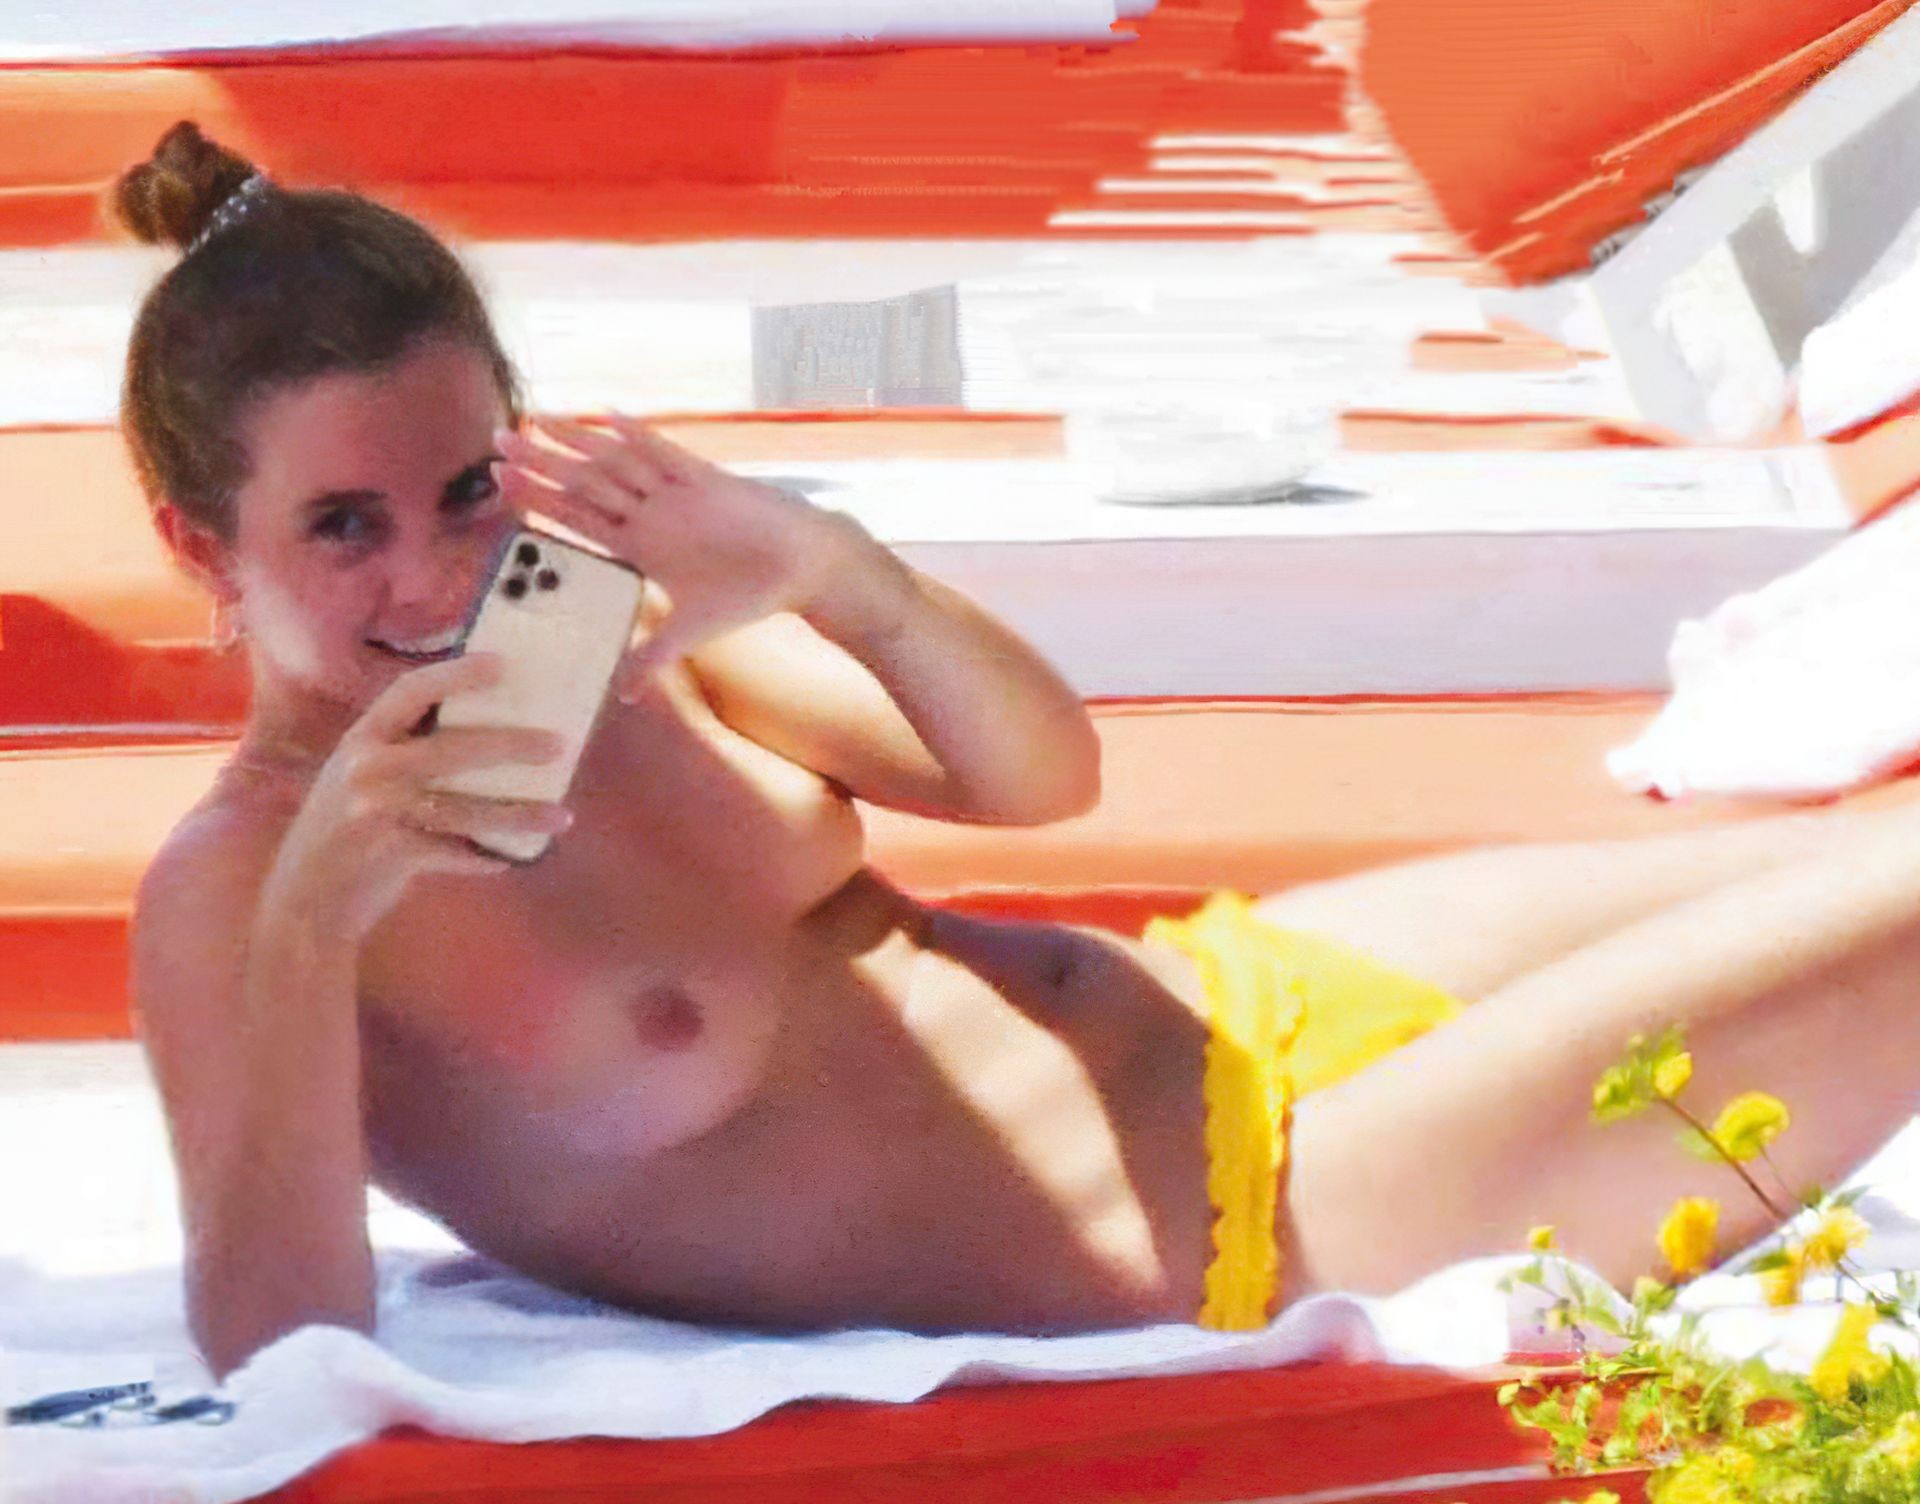 Emma Watson Took Off Her Top And Shamelessly Showed Her Small Naked Tits TheFappening.Pro 14 - Emma Watson Naked Tits (17 Photos)